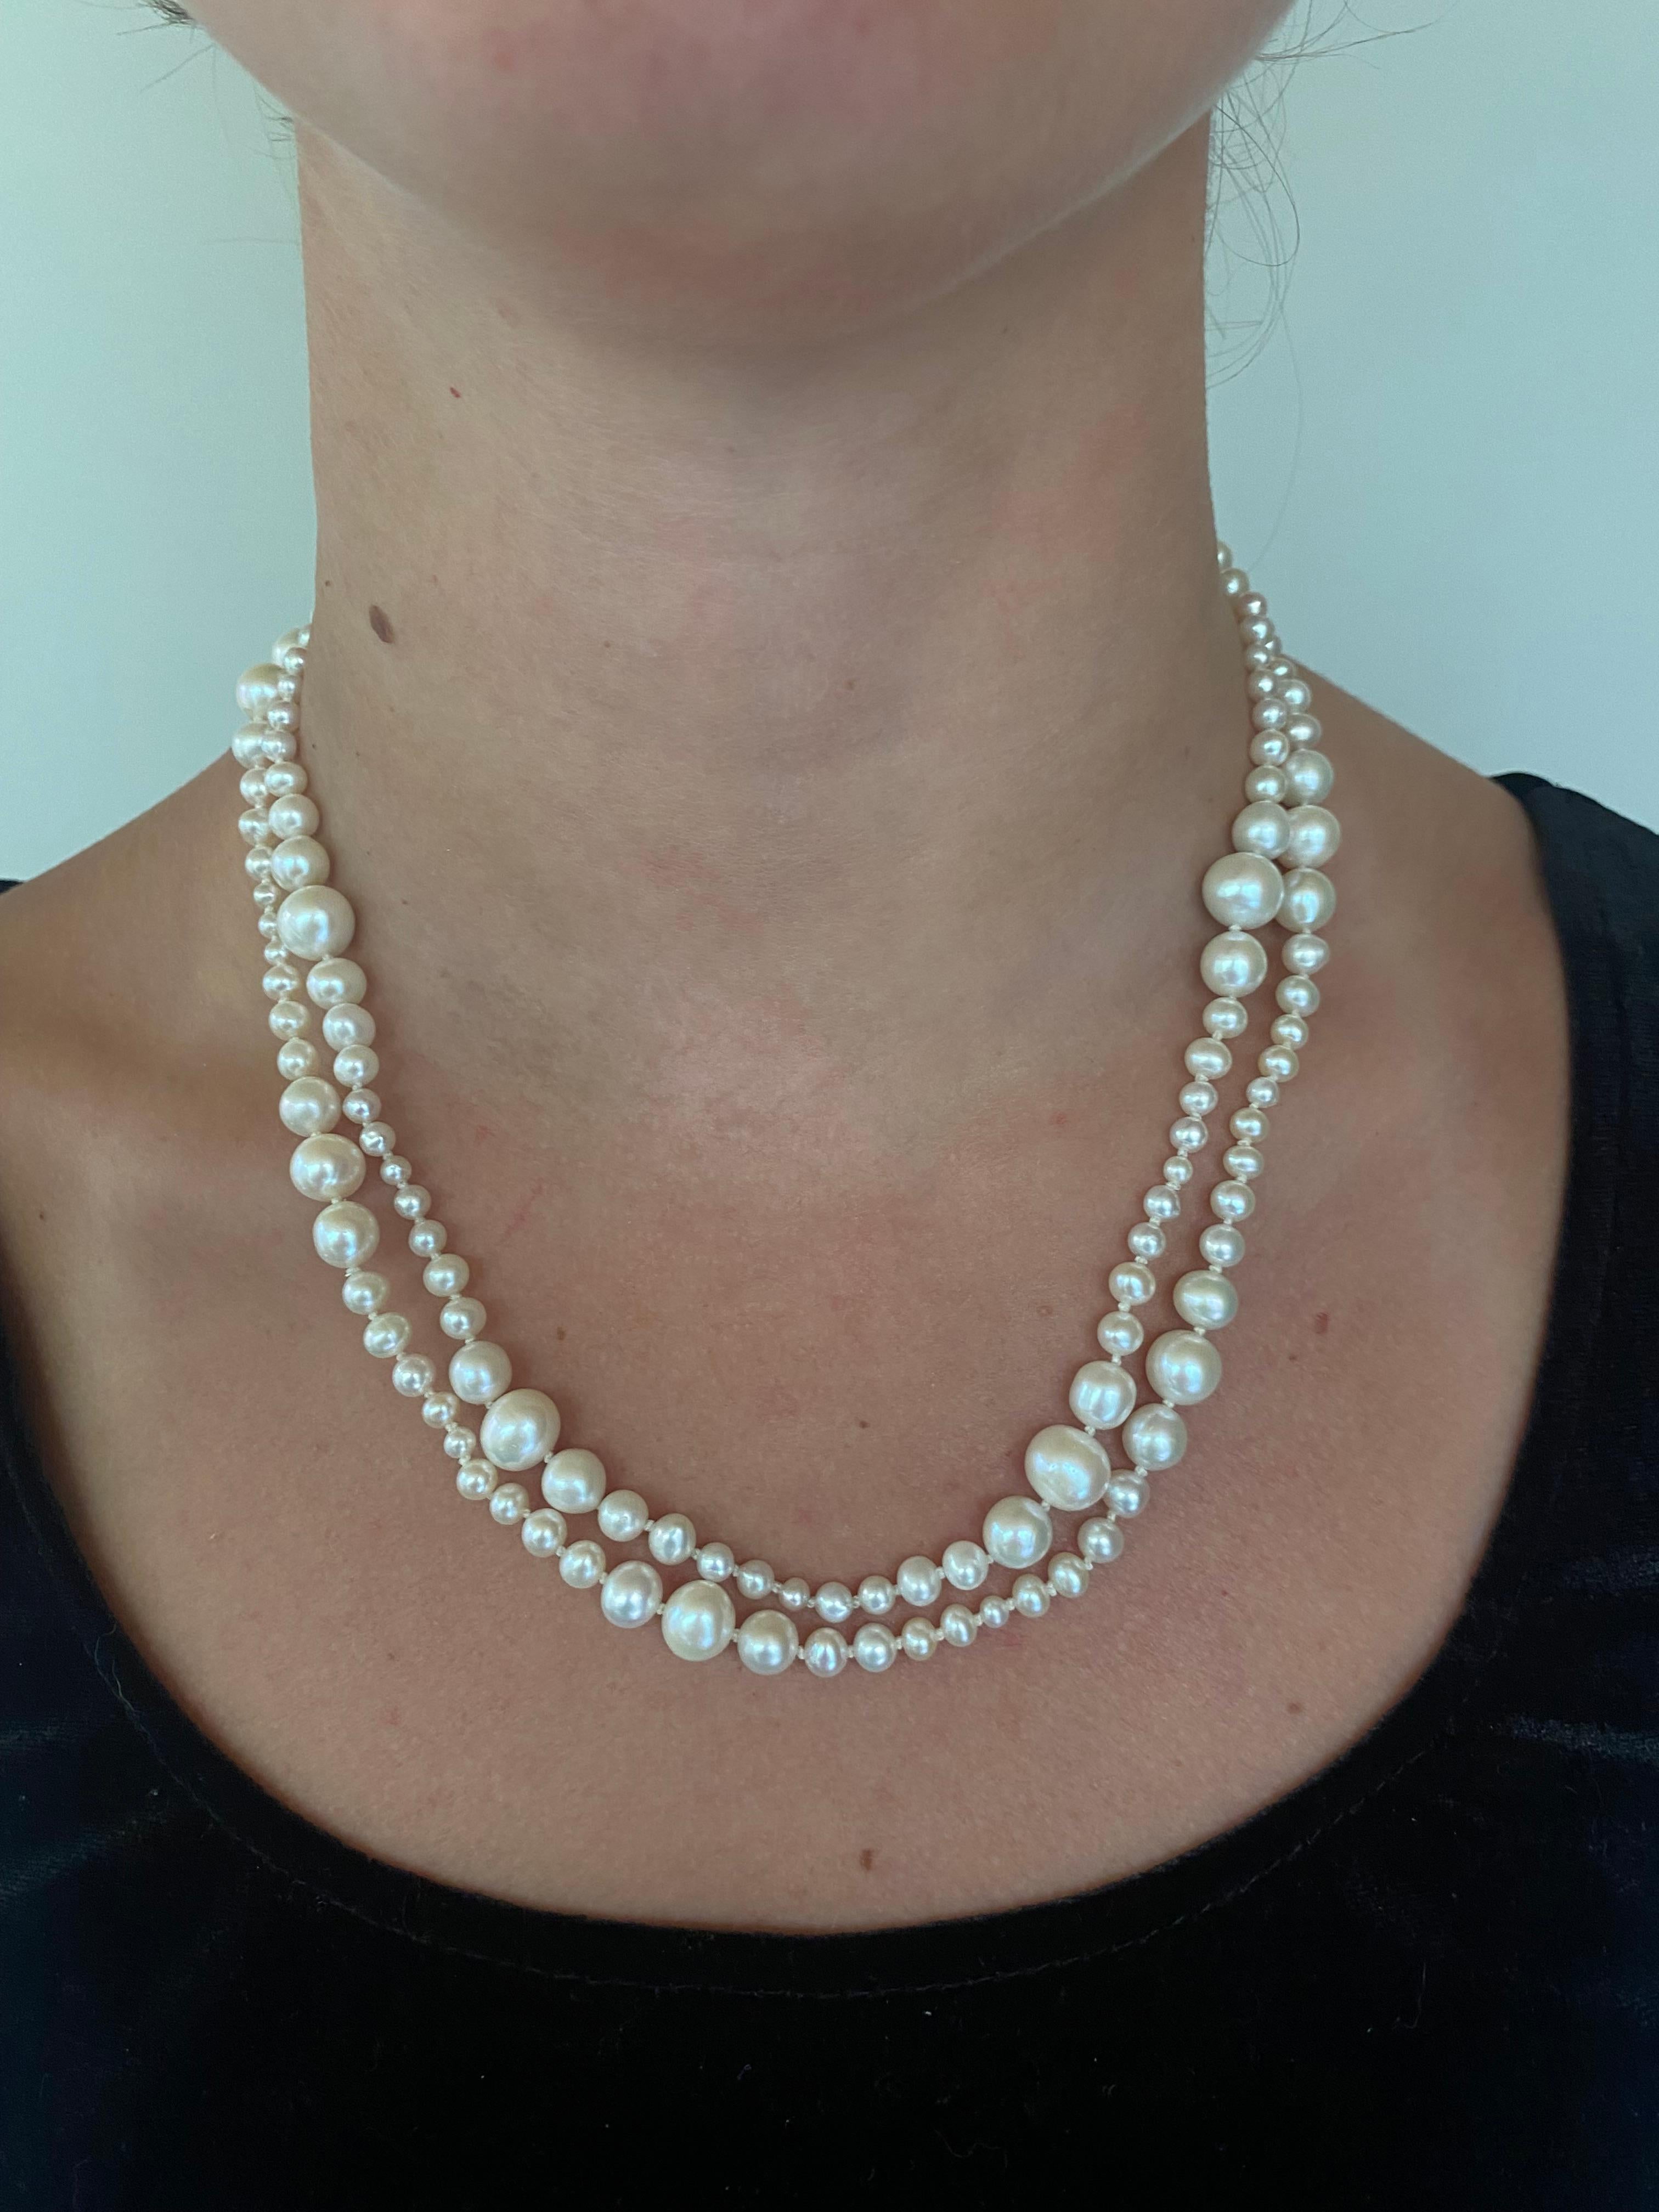 Artisan Marina J. Graduated Pearl Necklace with 14k White Gold Clasp